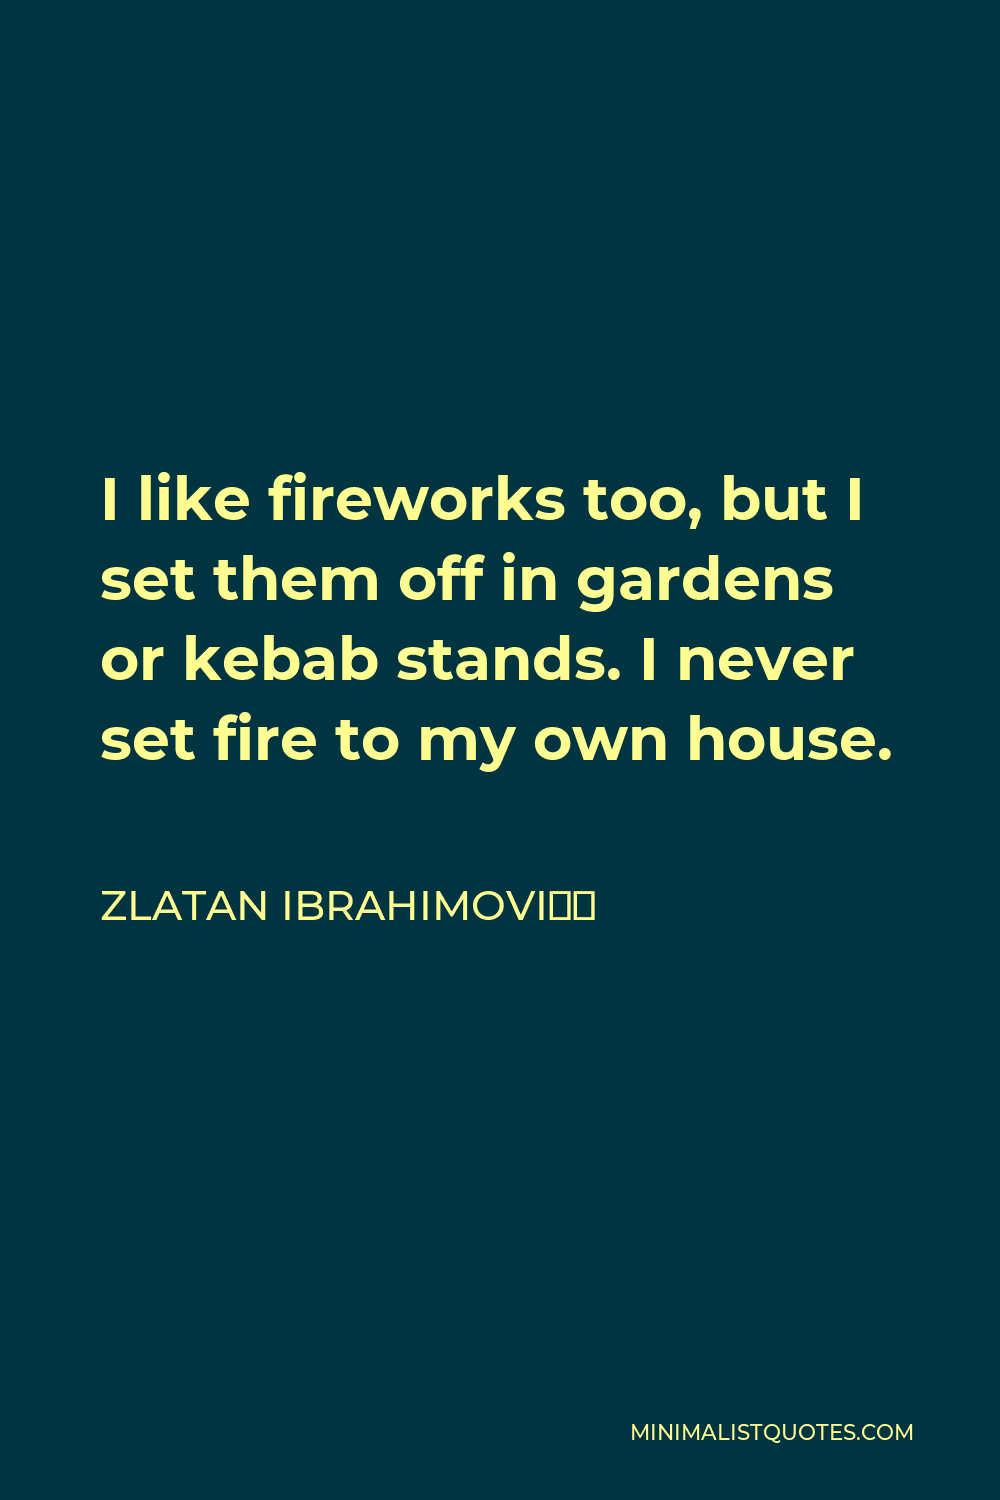 Zlatan Ibrahimović Quote: I like fireworks too, but I set them off in  gardens or kebab stands. I never set fire to my own house.